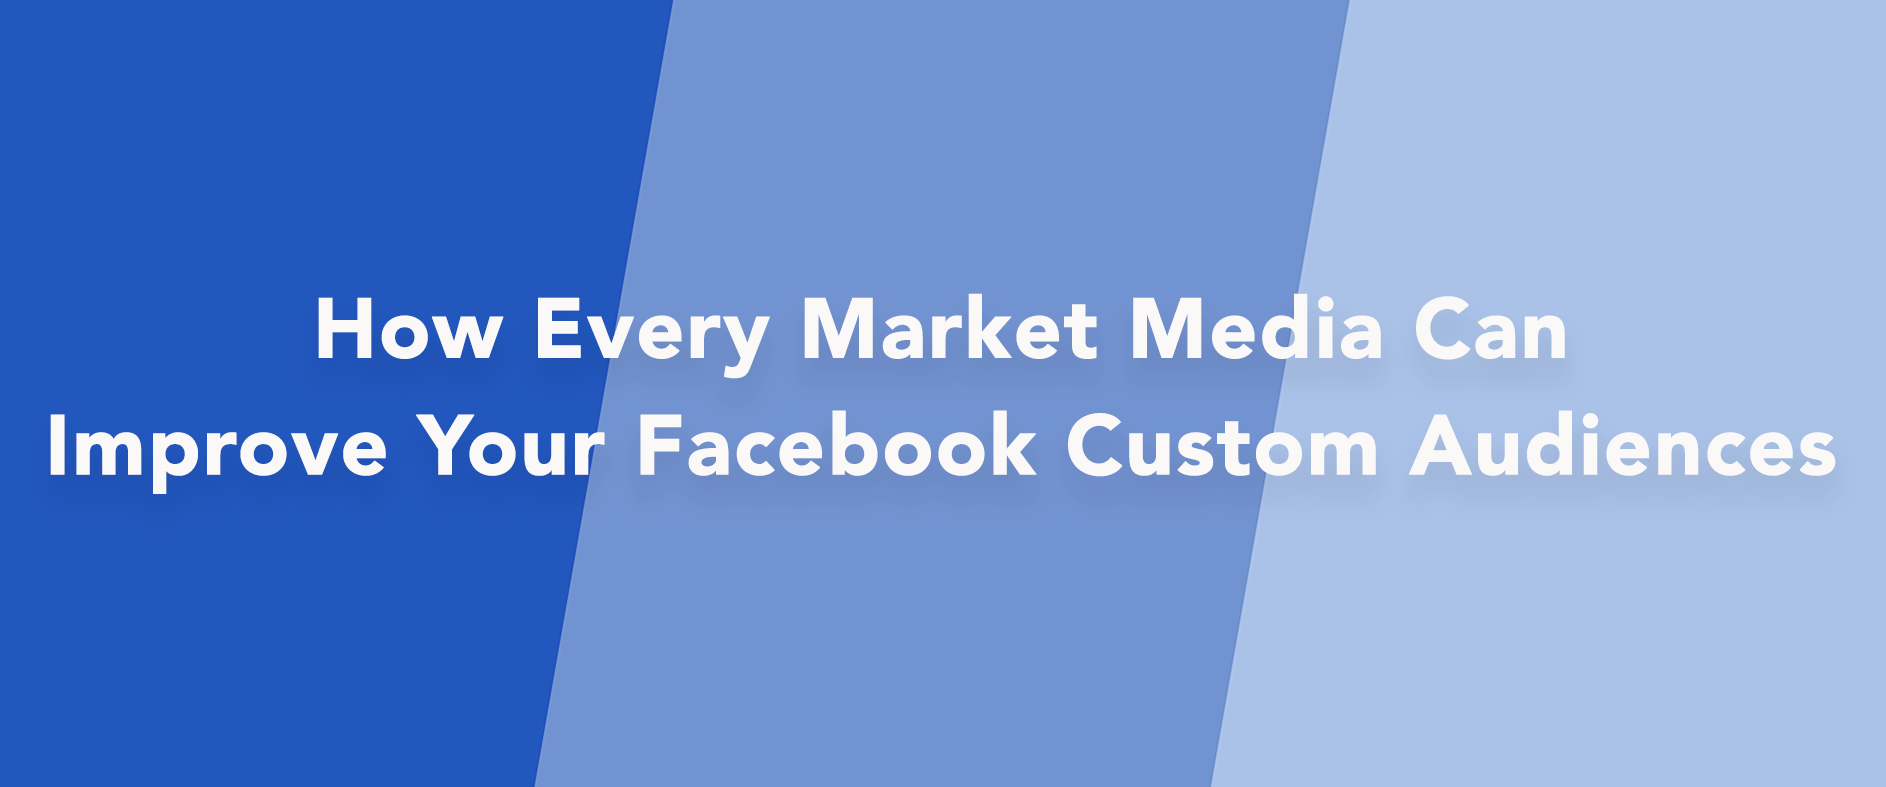 How You Can Improve Your Facebook Custom Audiences for B2B Marketing